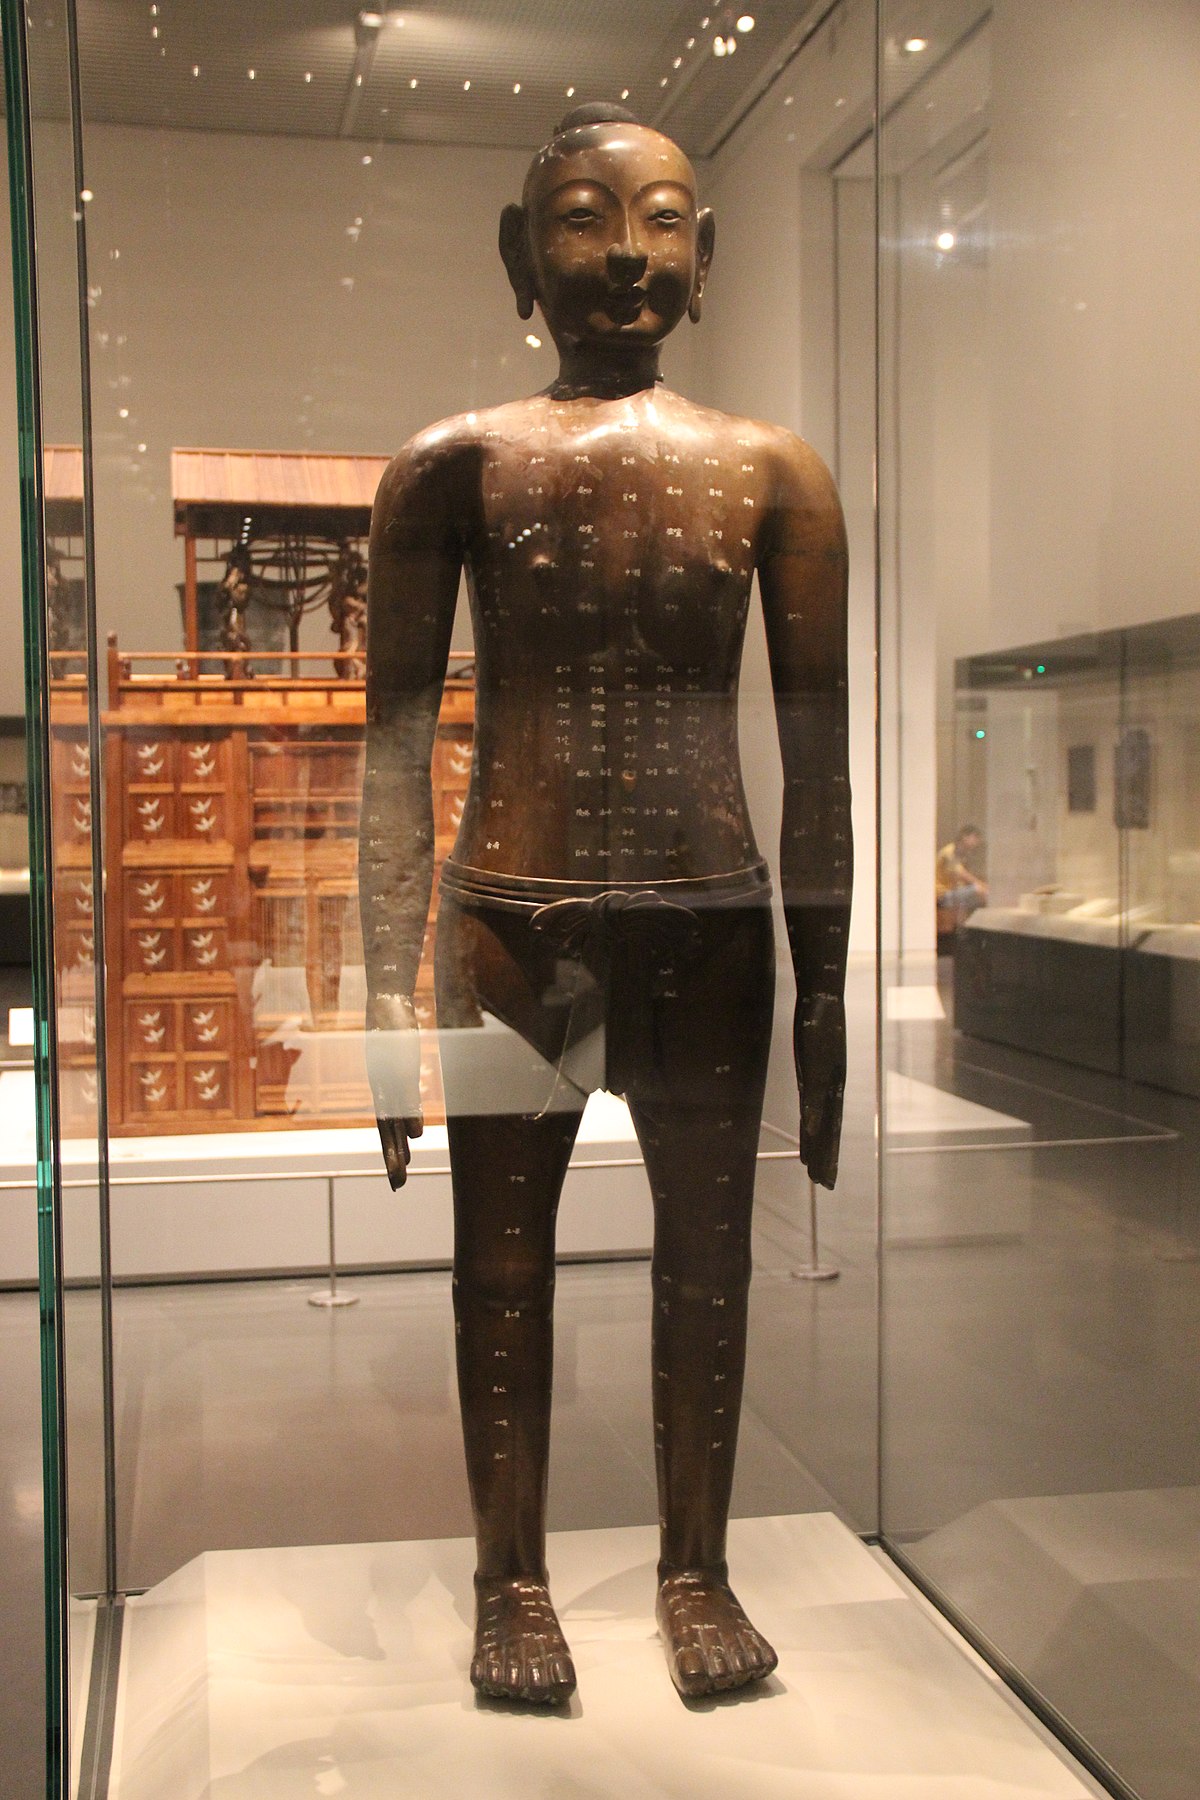 A photo of a Chinese statue with acupuncture designations on its body